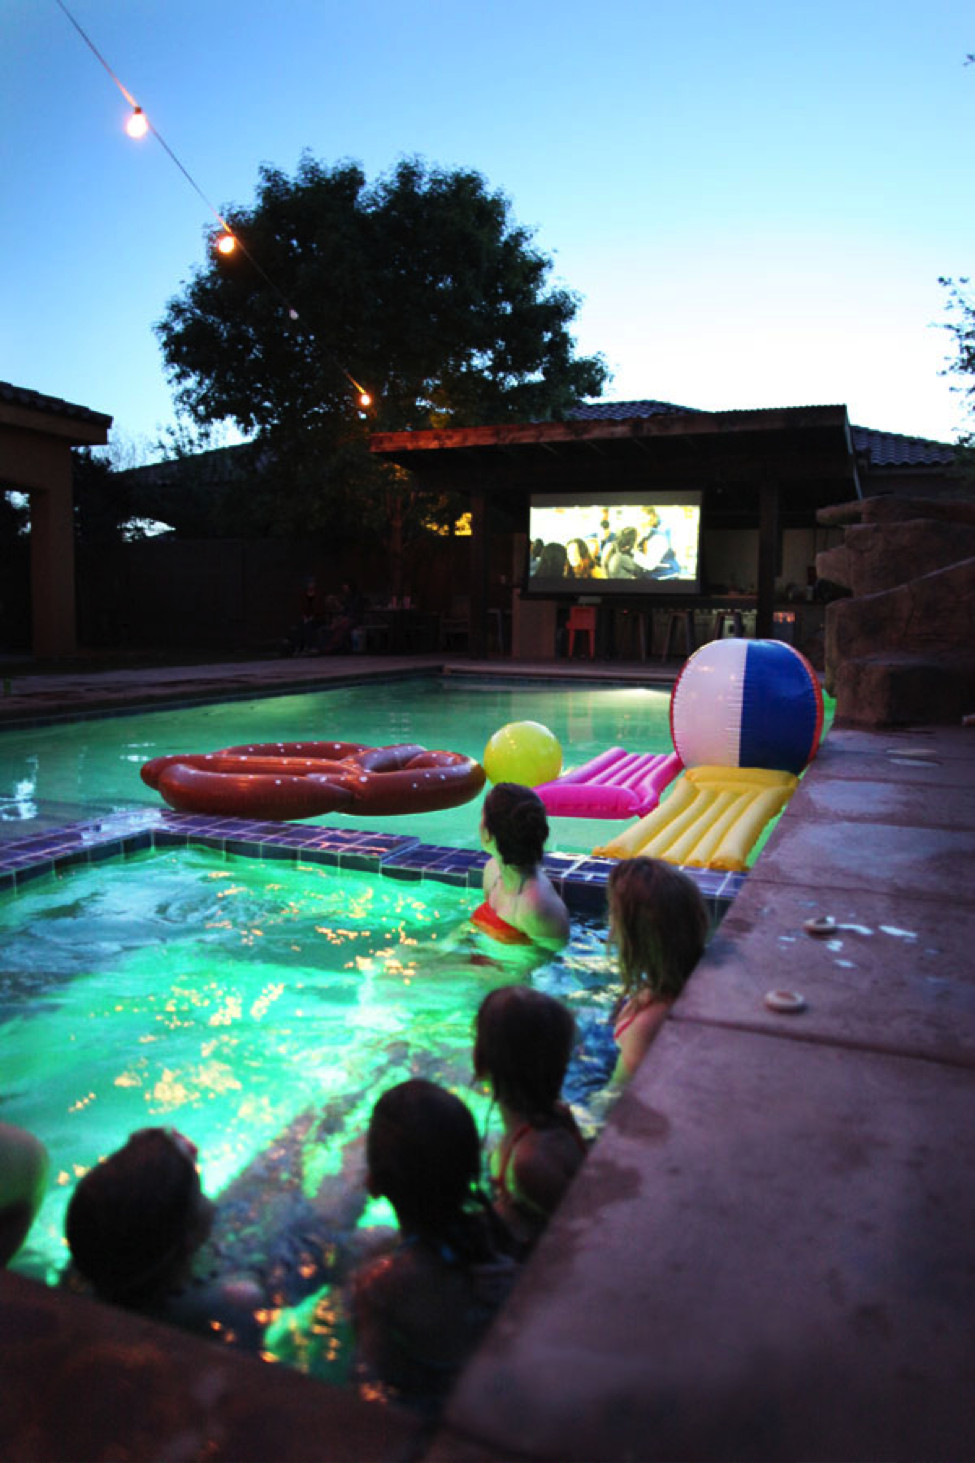 Night Pool Party Ideas For Adults
 Pool Party Ideas